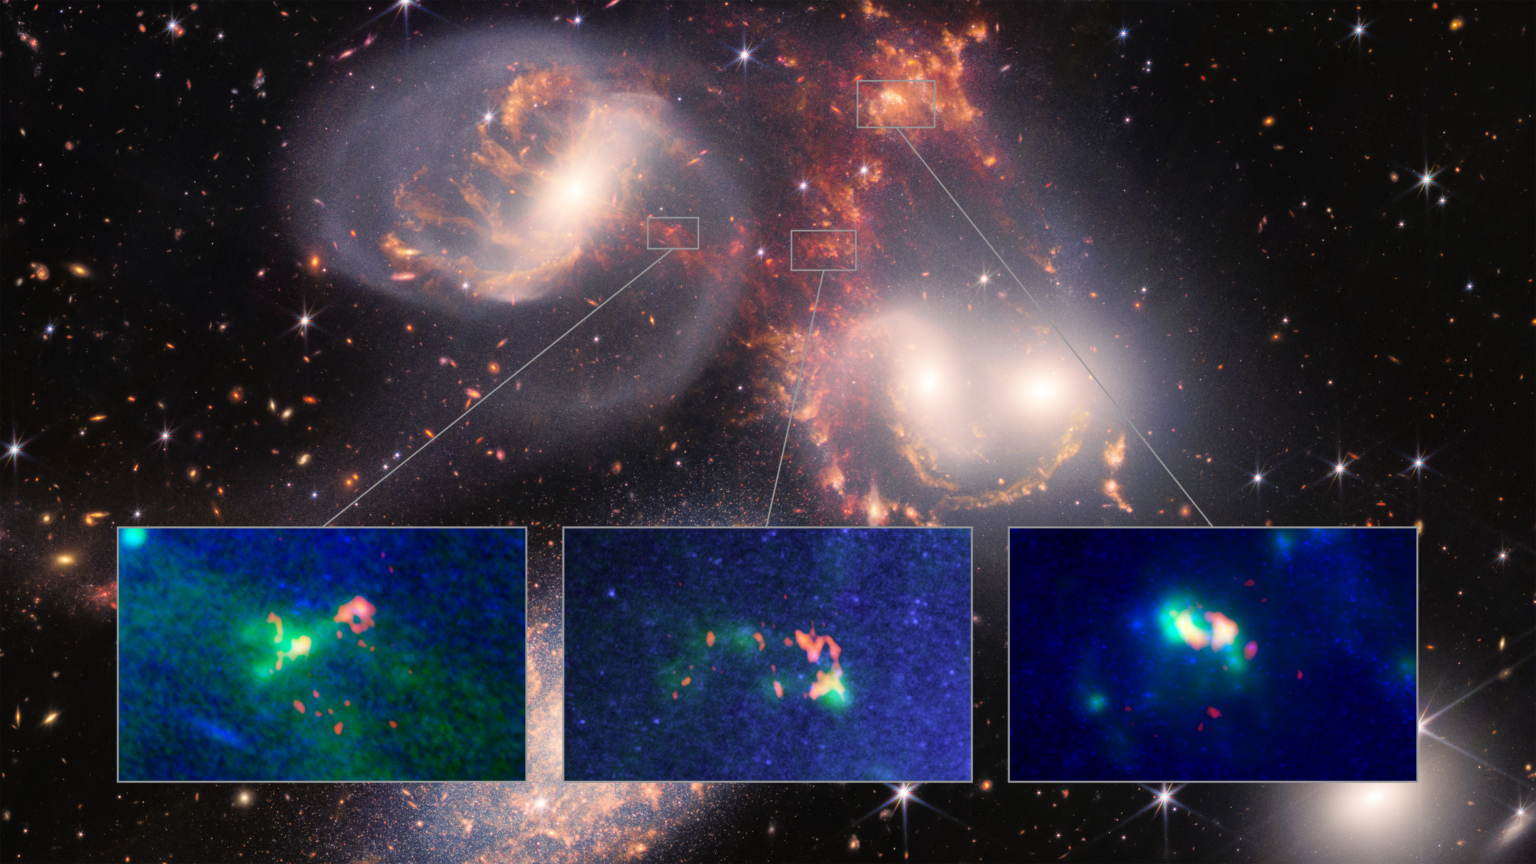 a recycling plant for warm and cold molecular hydrogen gas in Stephan’s Quintet